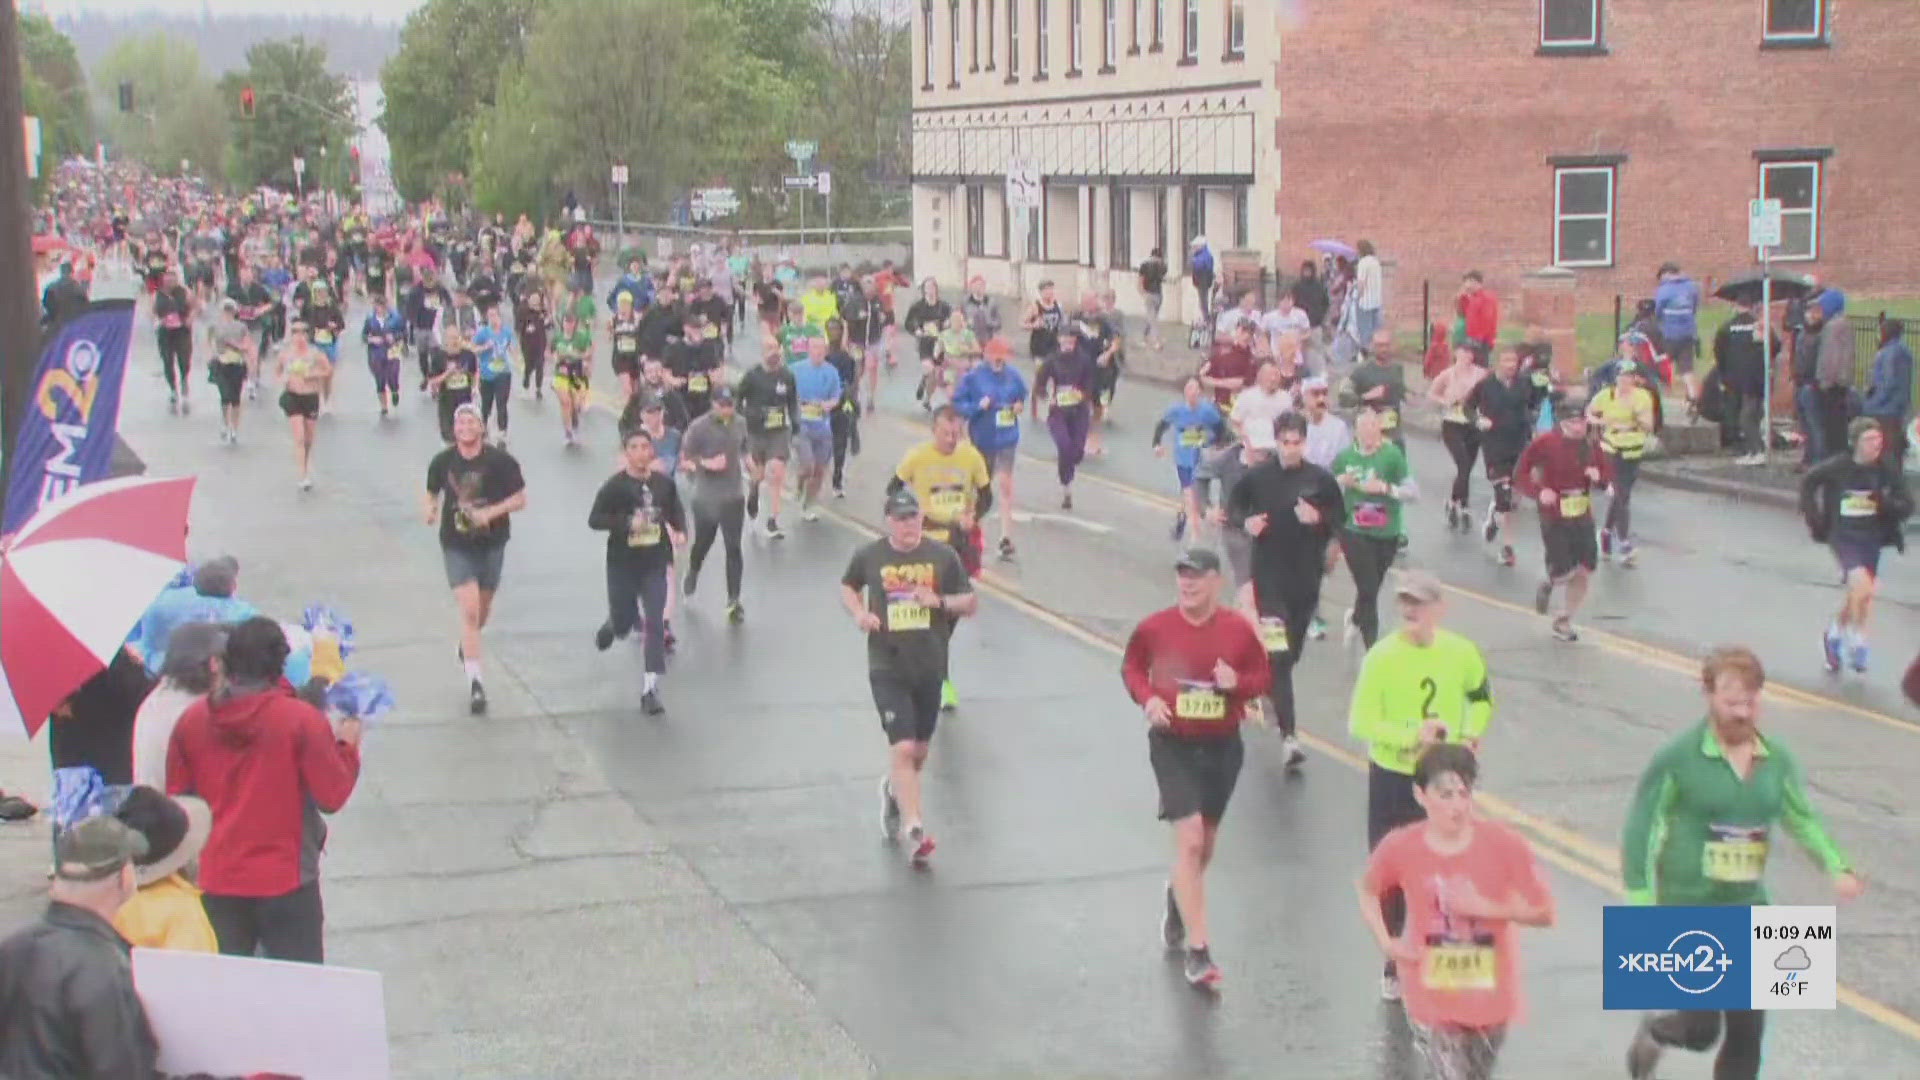 Want to see yourself running Bloomsday? KREM 2 has you covered!